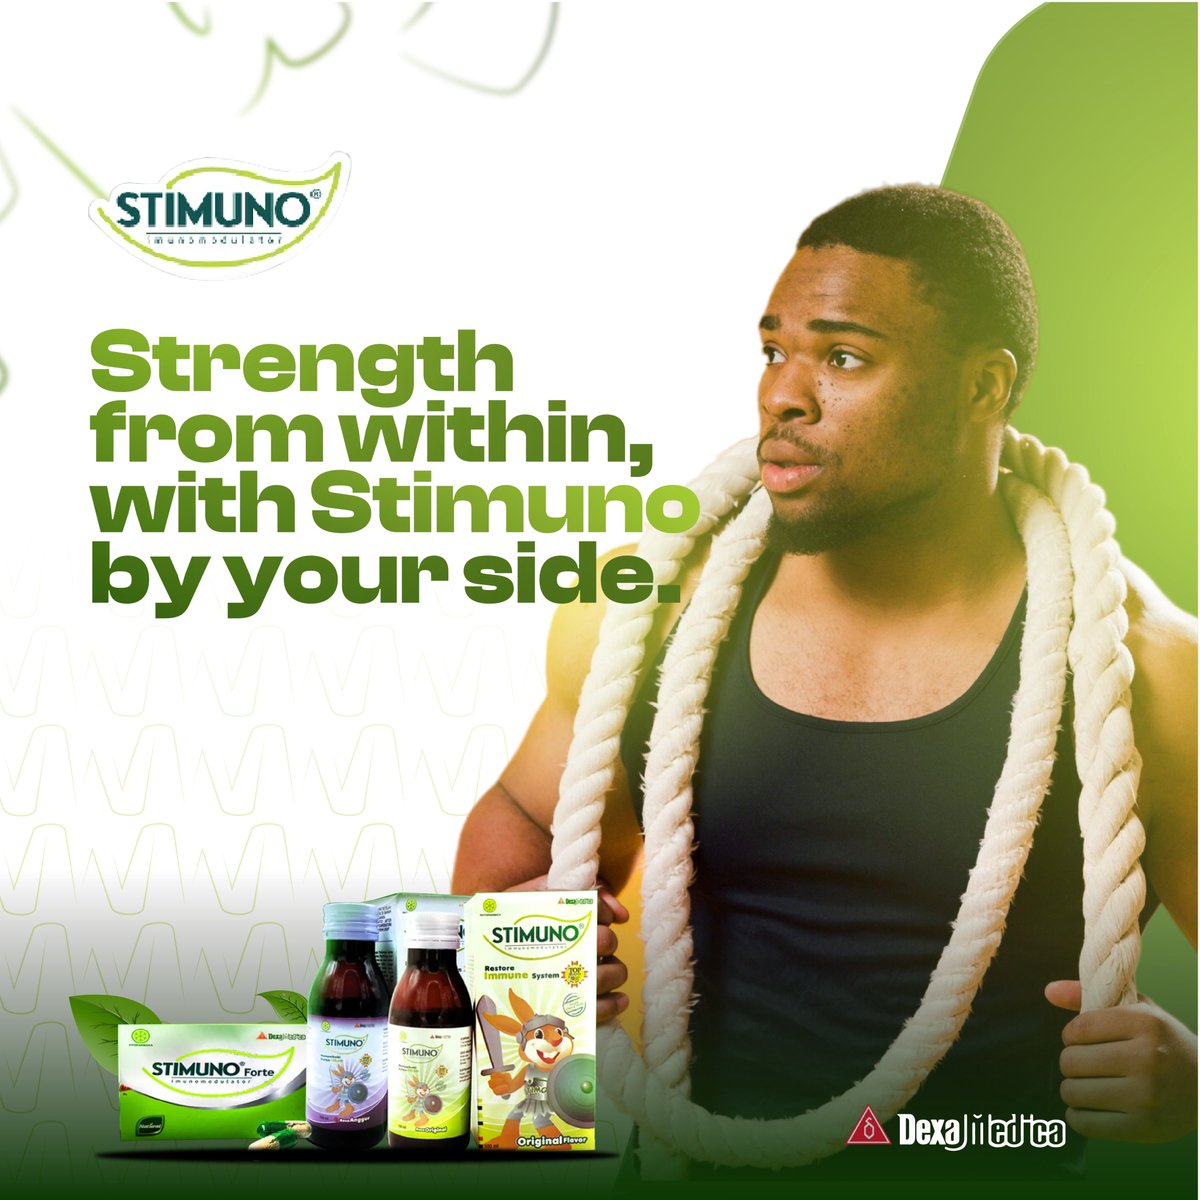 Unlock Your Inner Strength with Stimuno! 💪✨ With Stimuno by your side, fortify your immune system and take on your day with confidence.

#Stimuno #healthylife #immunesystem #ImmuneBooster